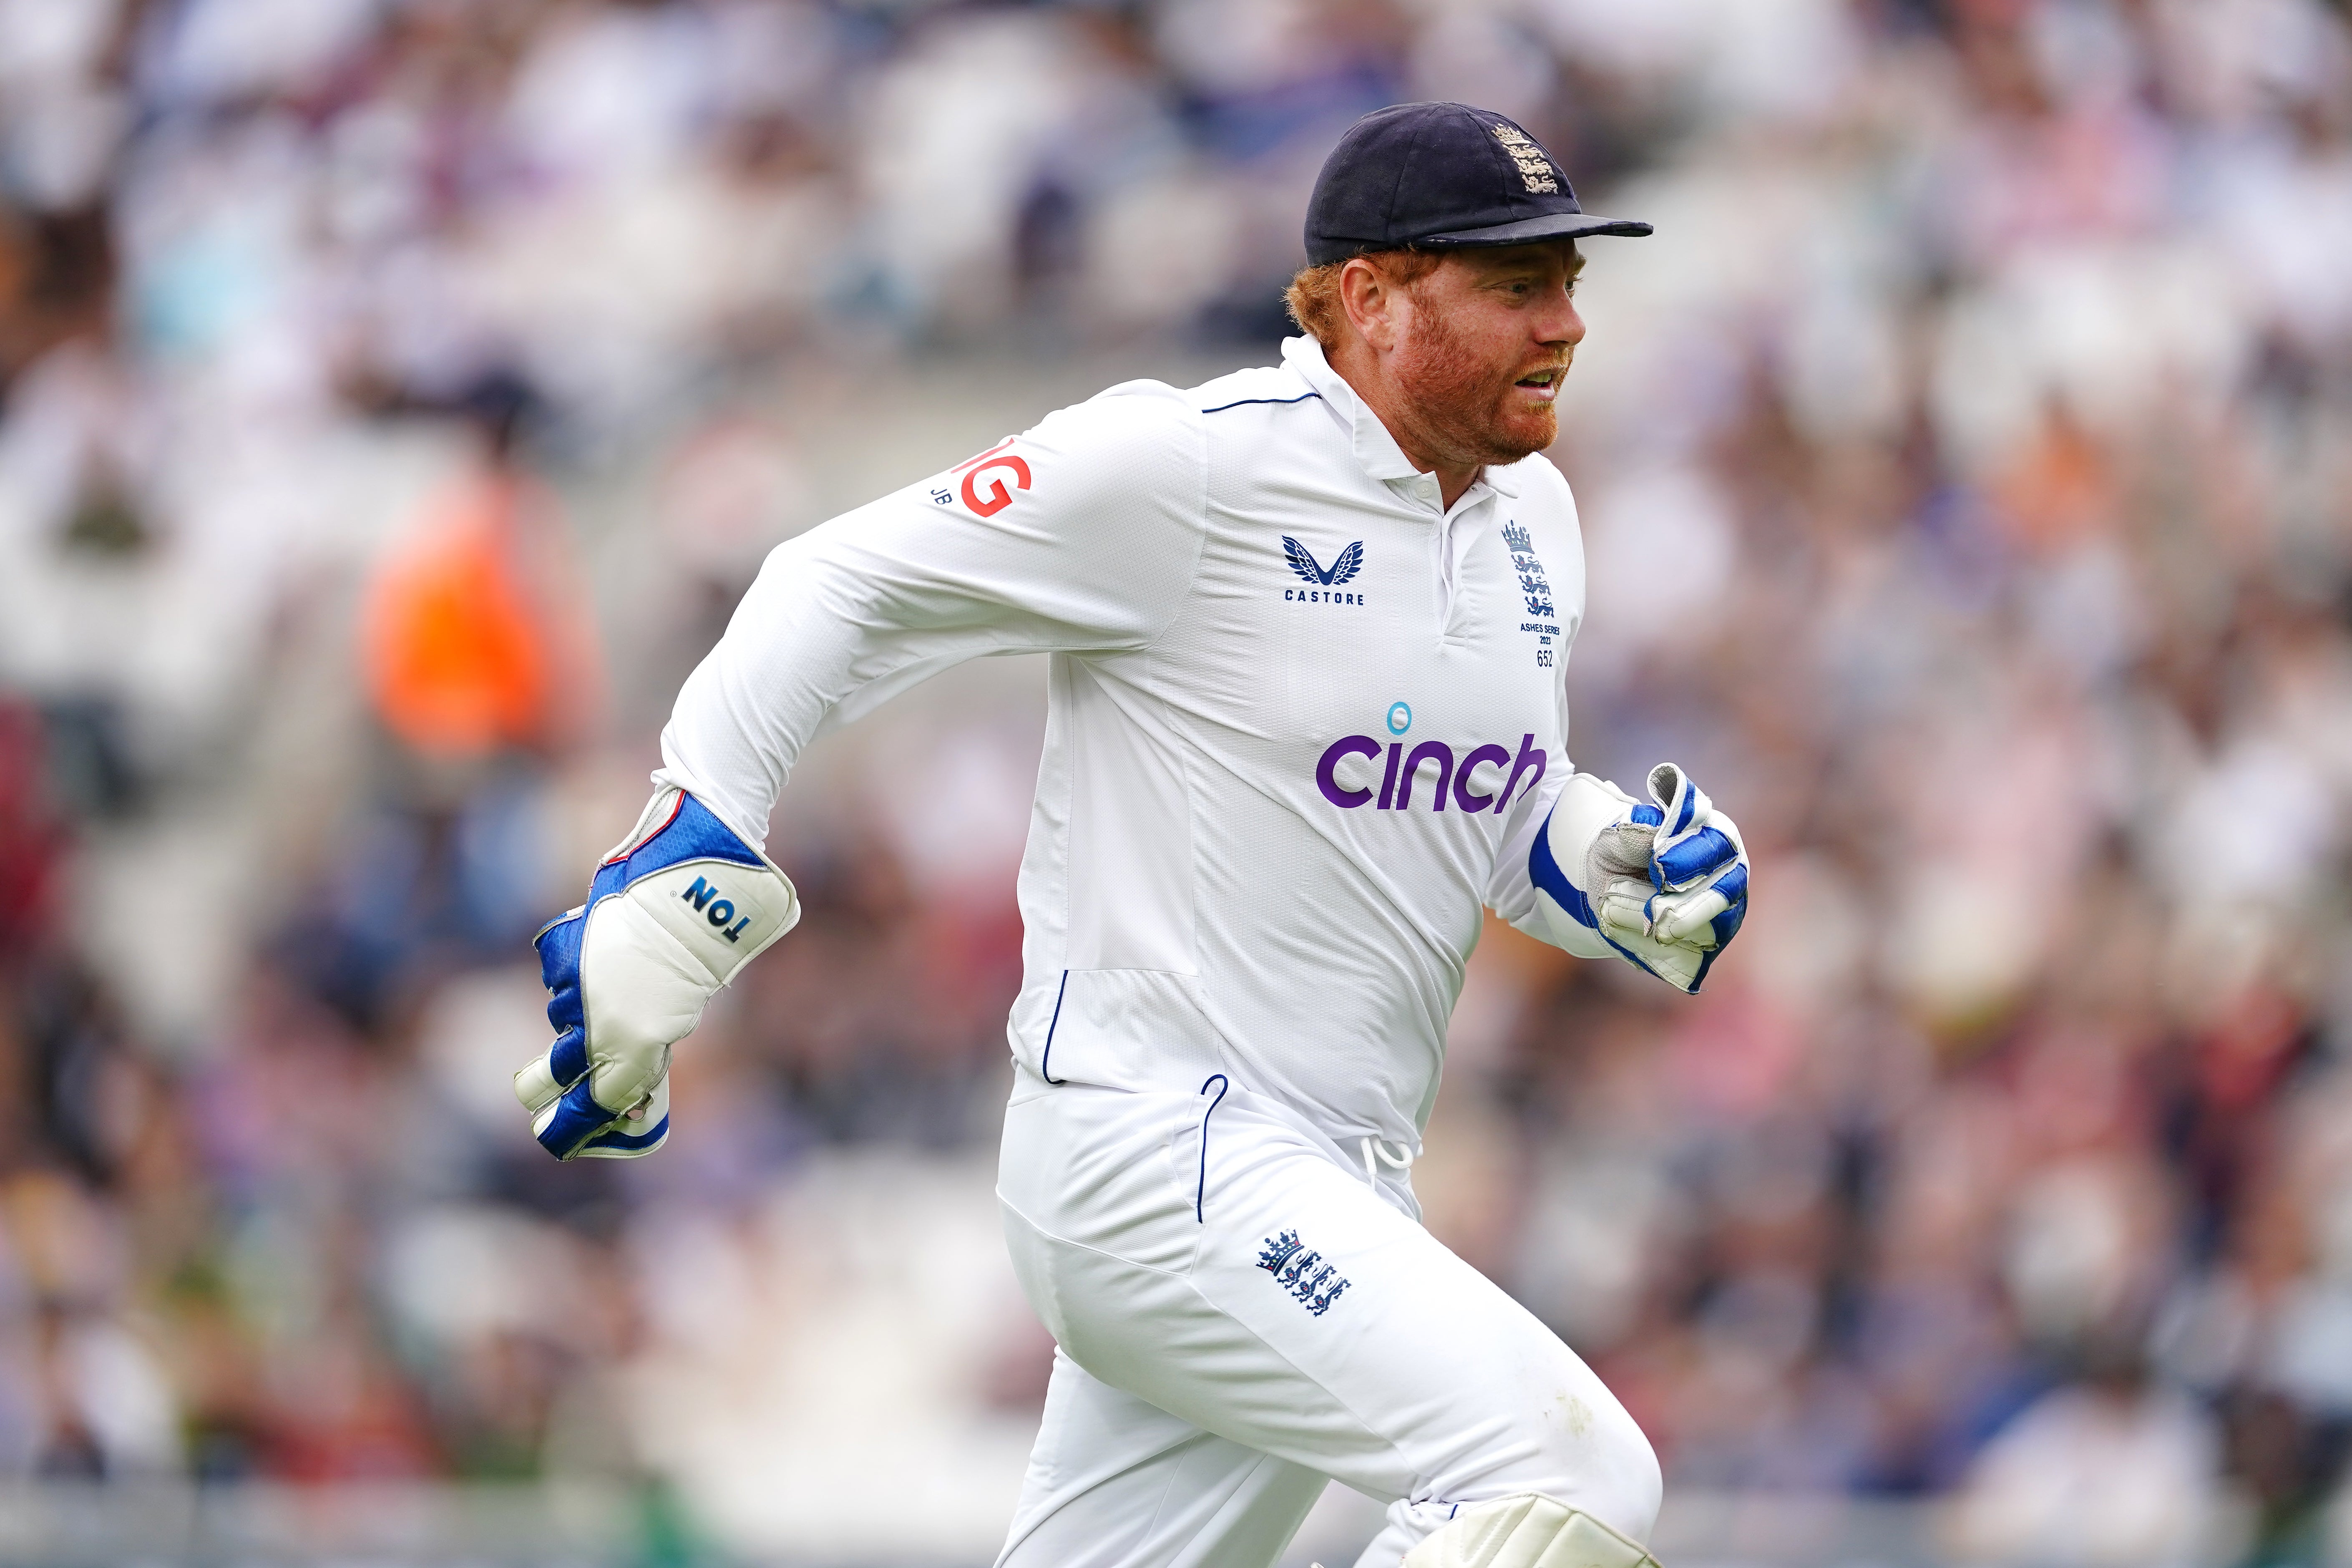 Jonny Bairstow has been cast aside by England